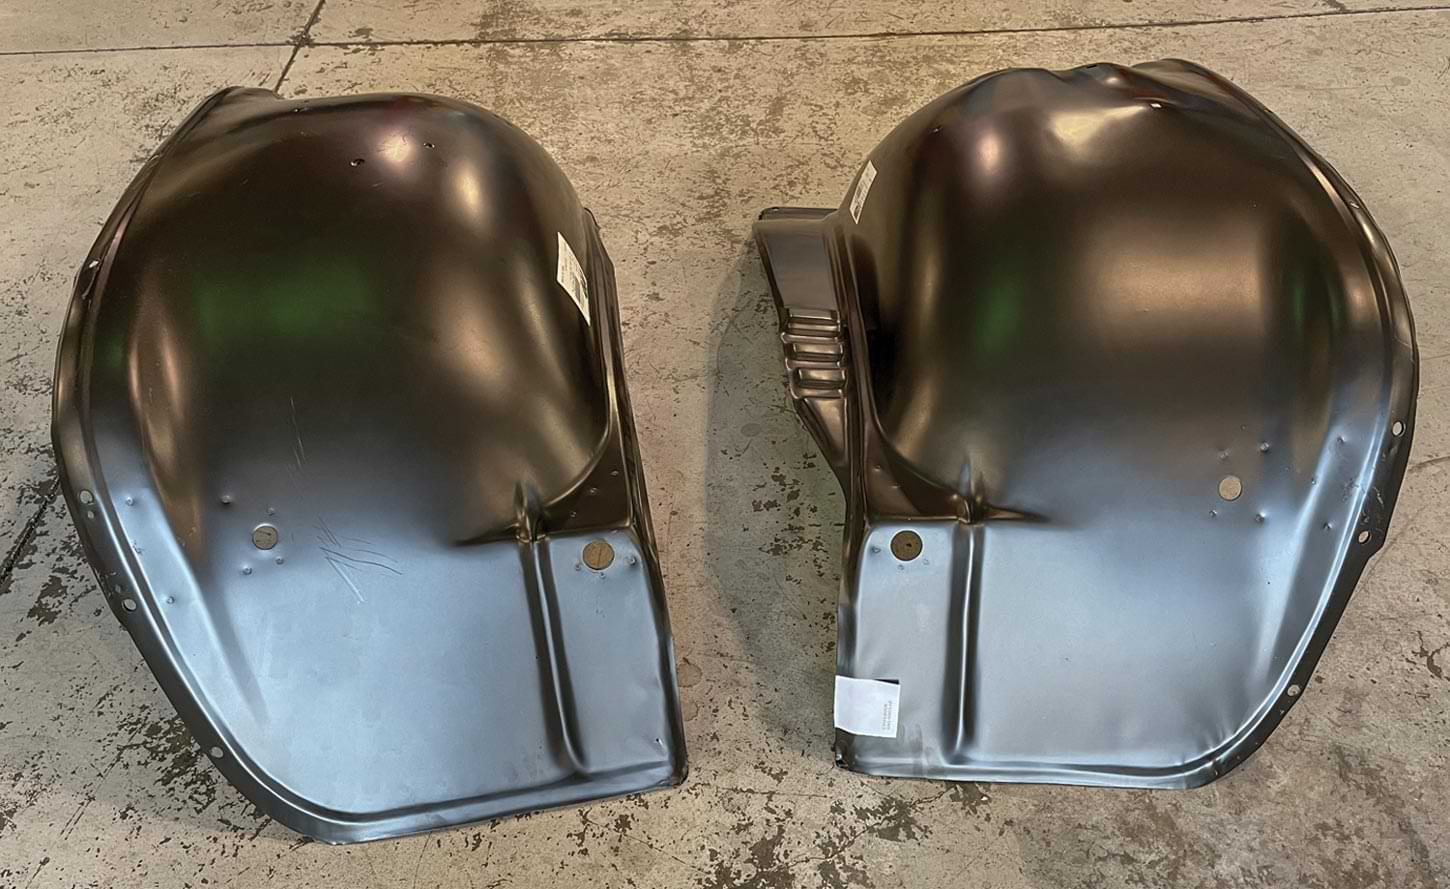 new inner fenders from Auto Metal Direct (AMD)